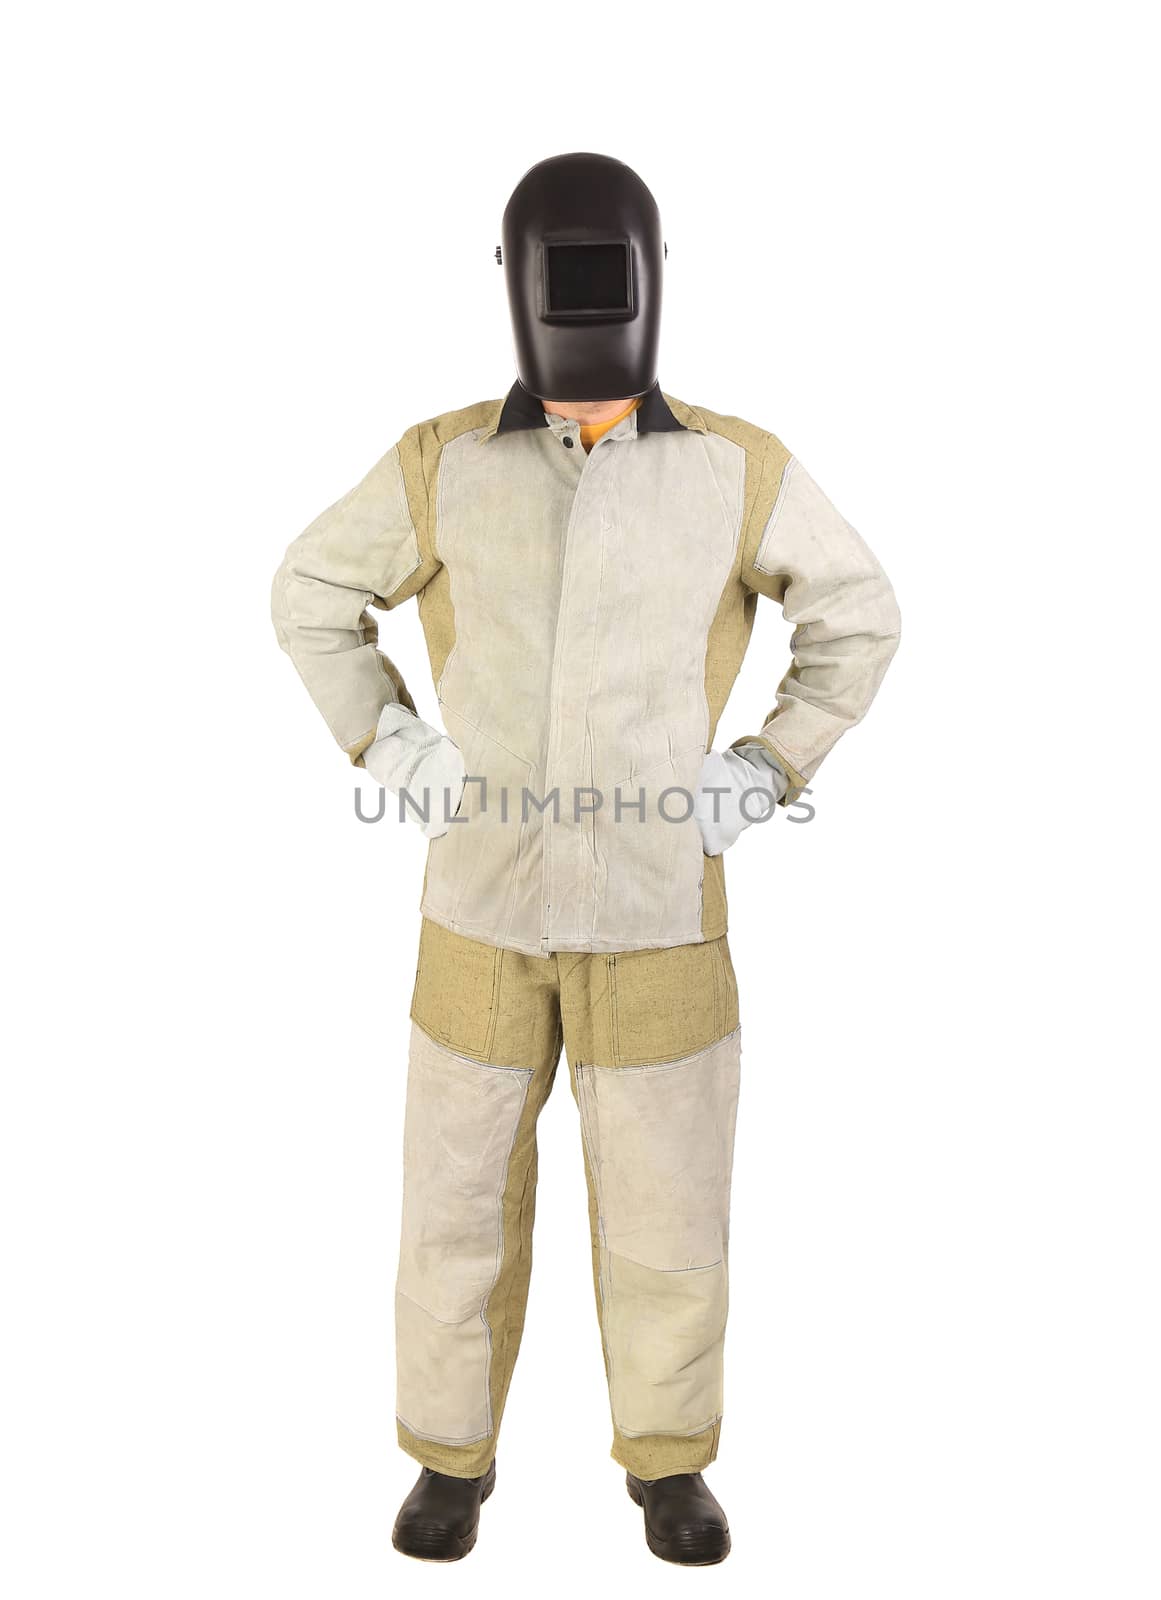 Welder in mask with mittens. Isolated on a white background.